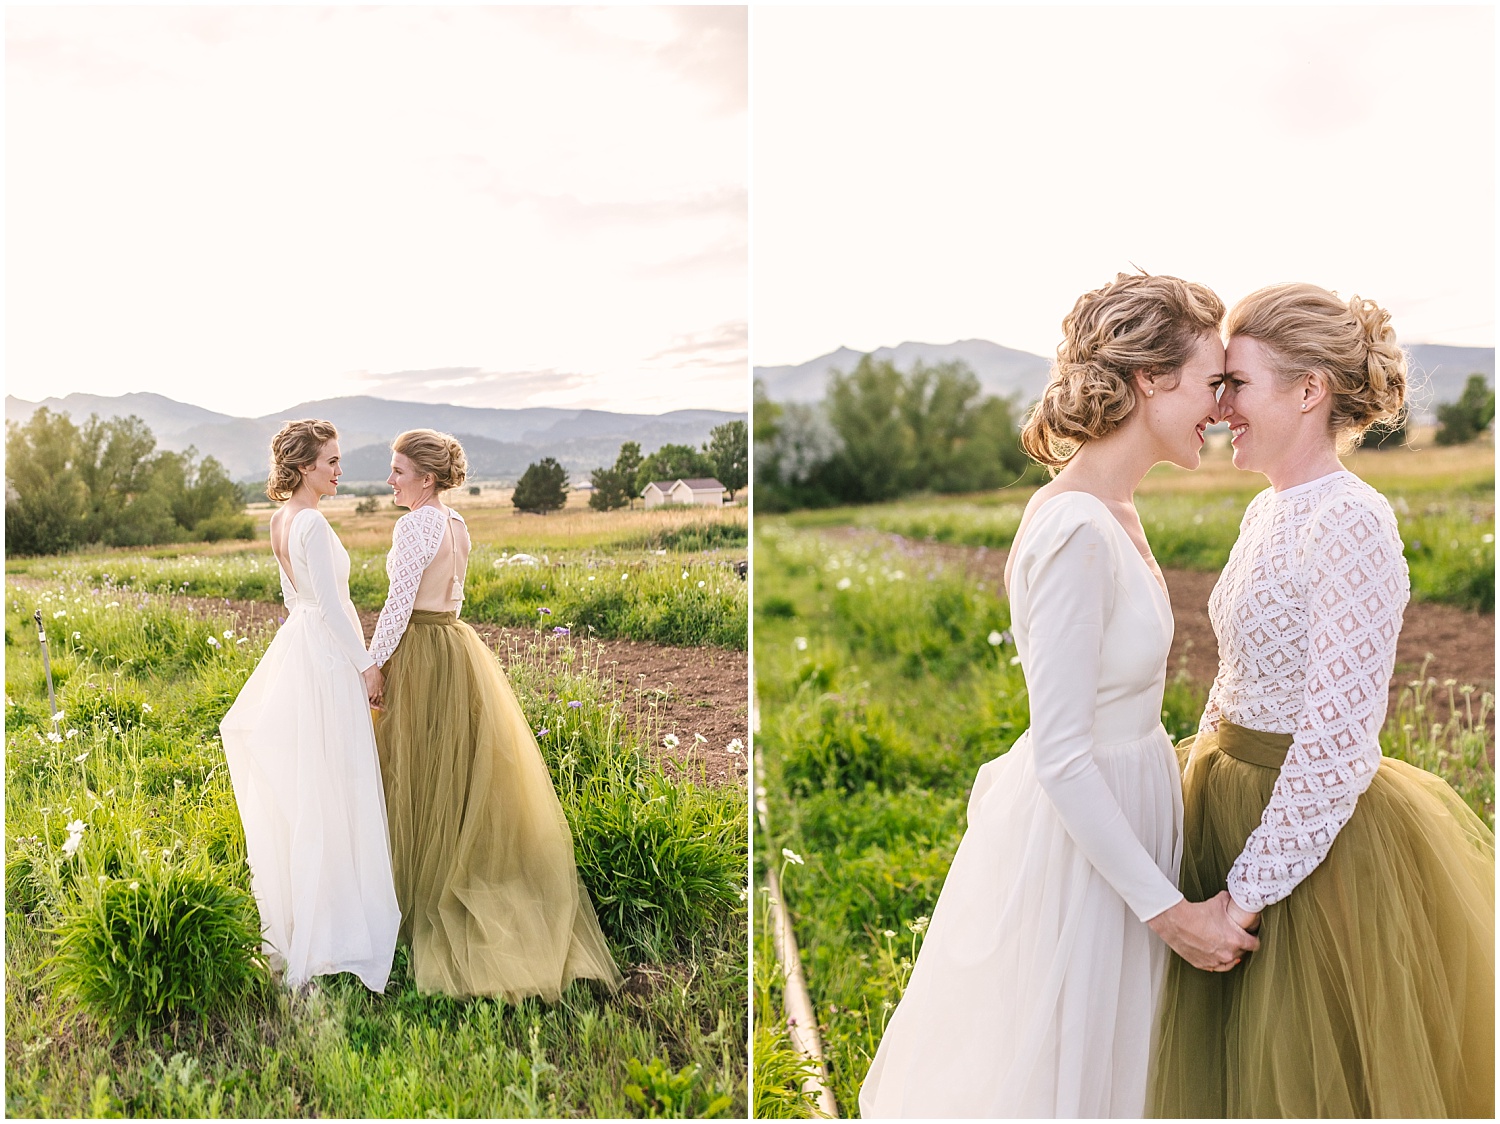 Portraits of the two brides at sunset at Pastures of Plenty wedding in Boulder Colorado